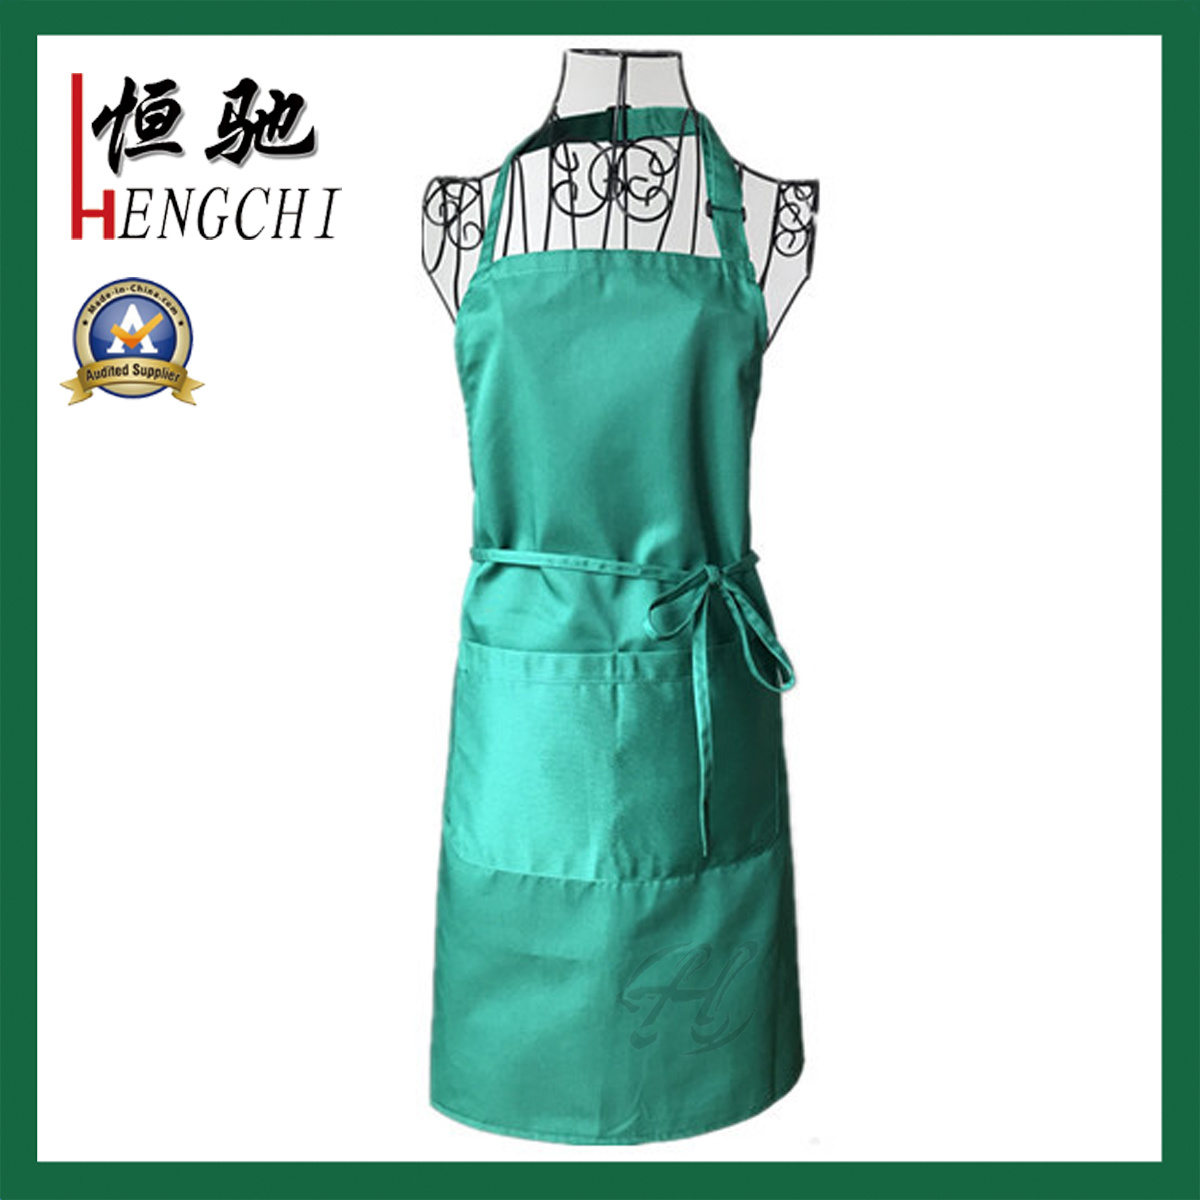 Promotional Polyester Kitchen Cooking Apron with Customized Logo